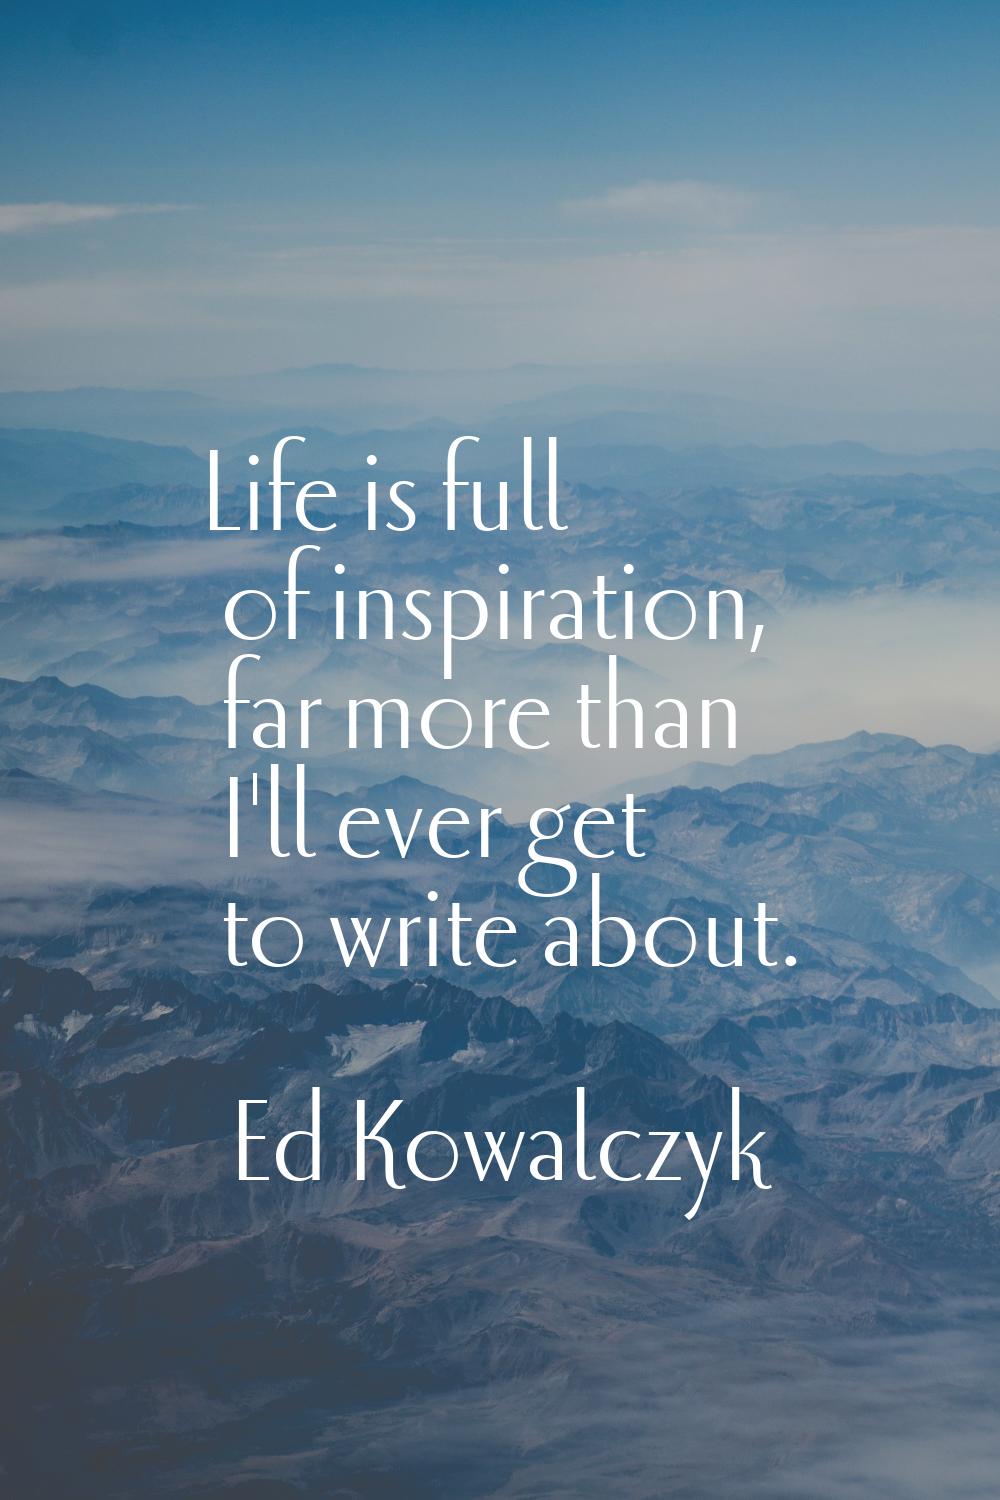 Life is full of inspiration, far more than I'll ever get to write about.